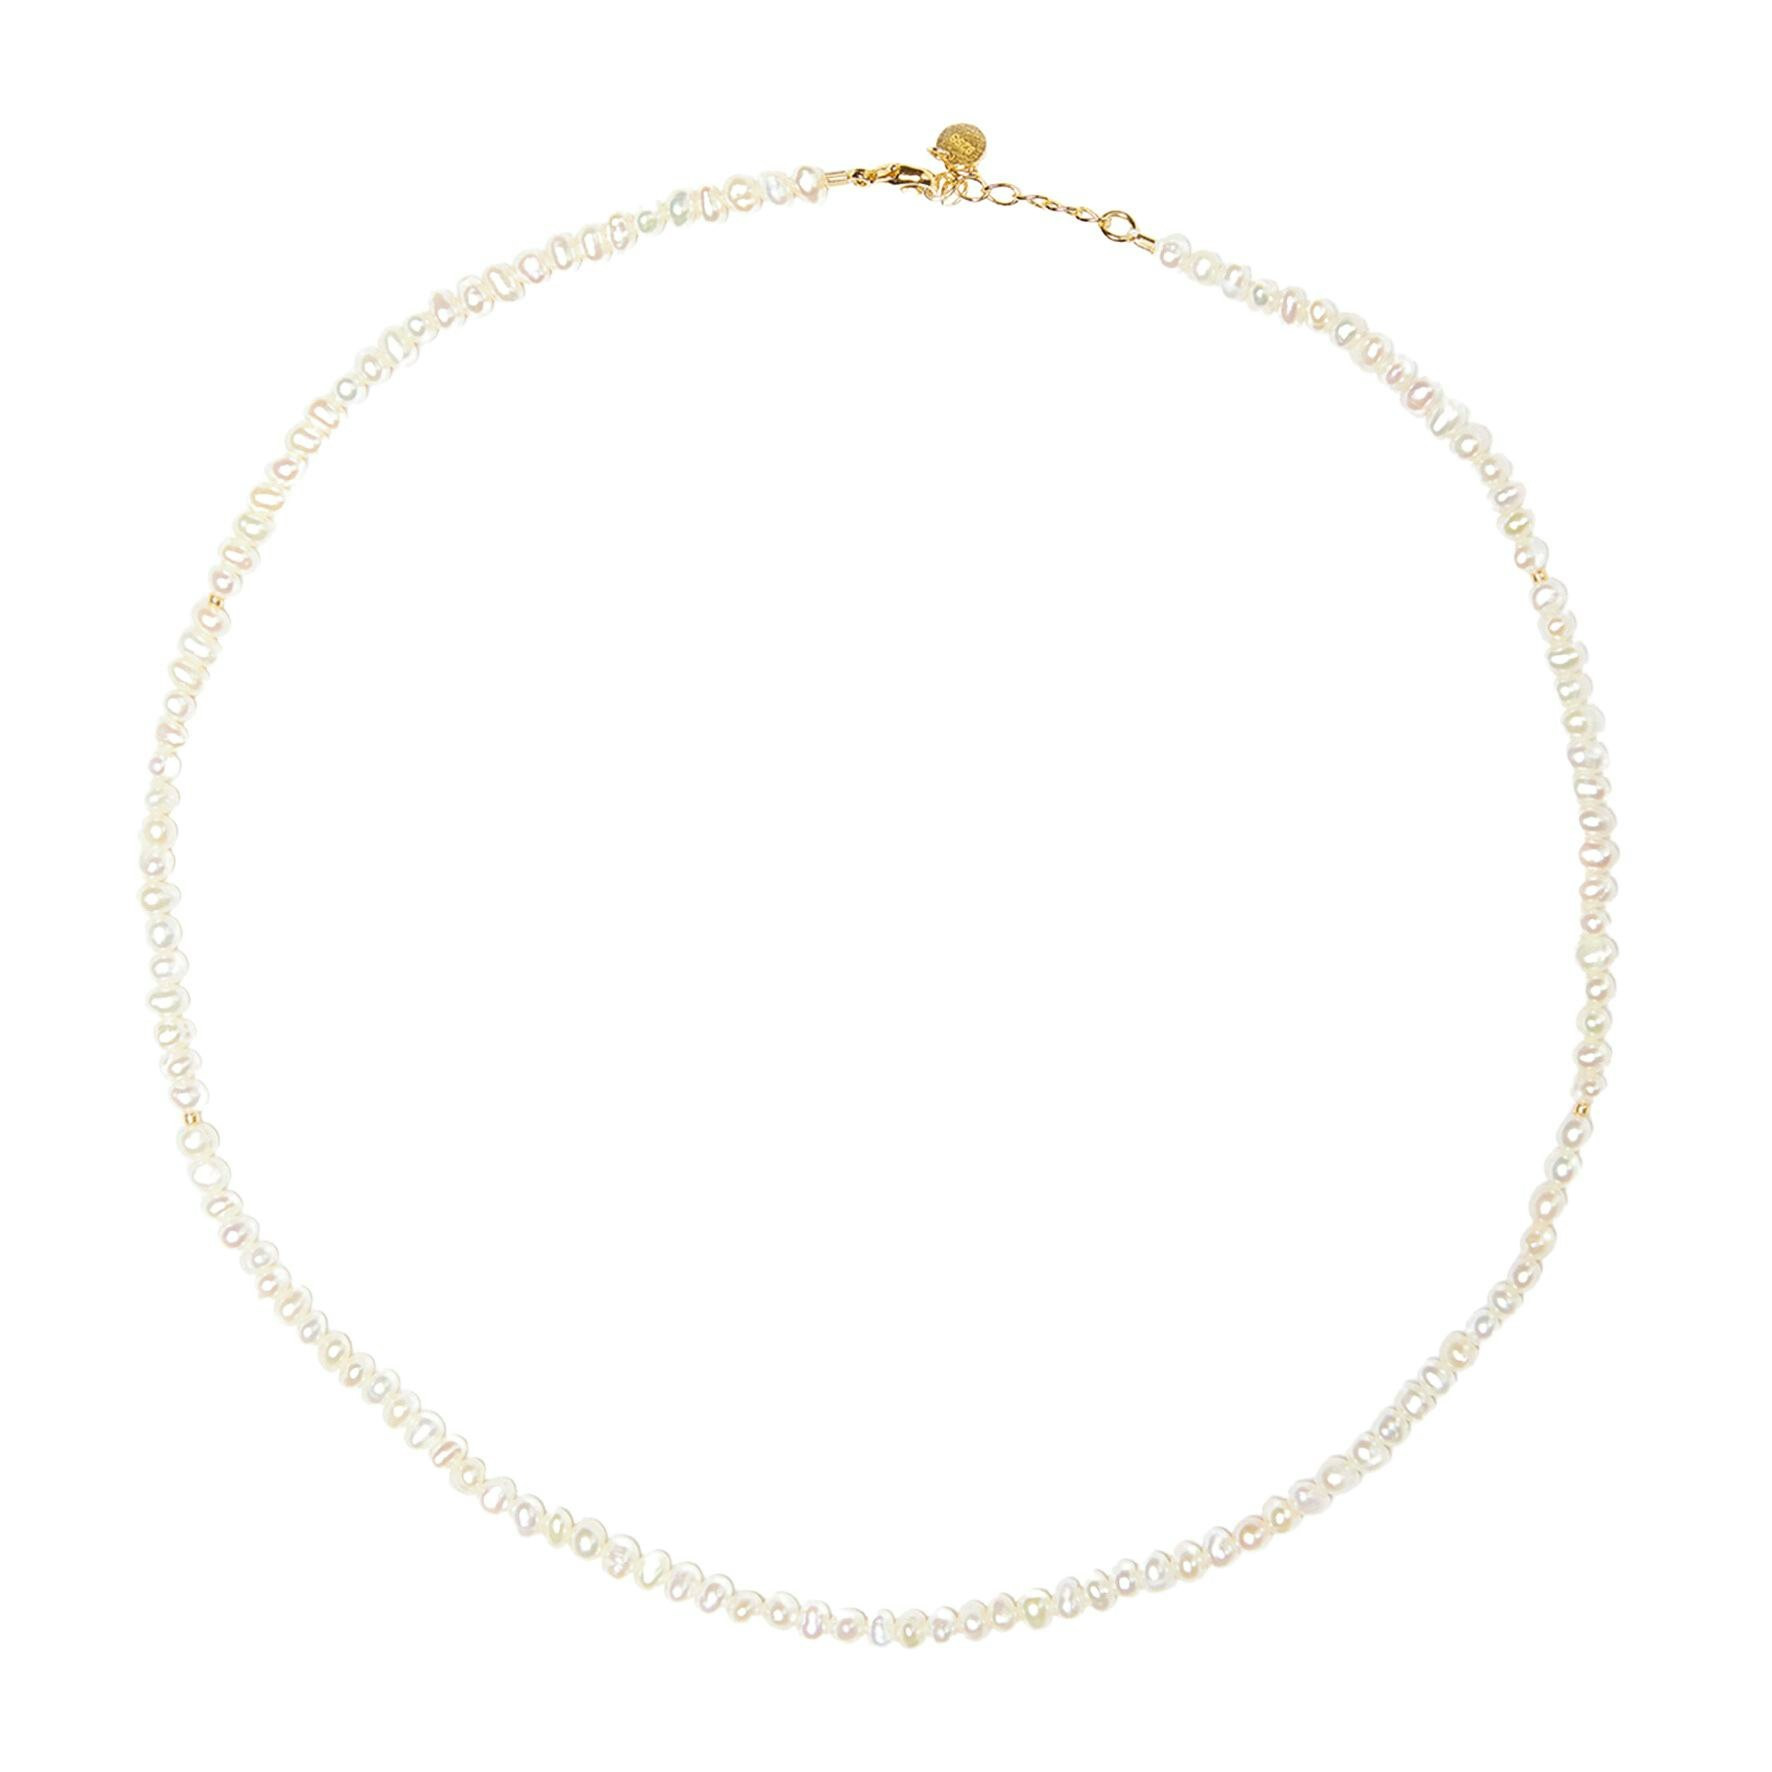 Sky Necklace from Sorelle Jewellery in Goldplated Silver Sterling 925